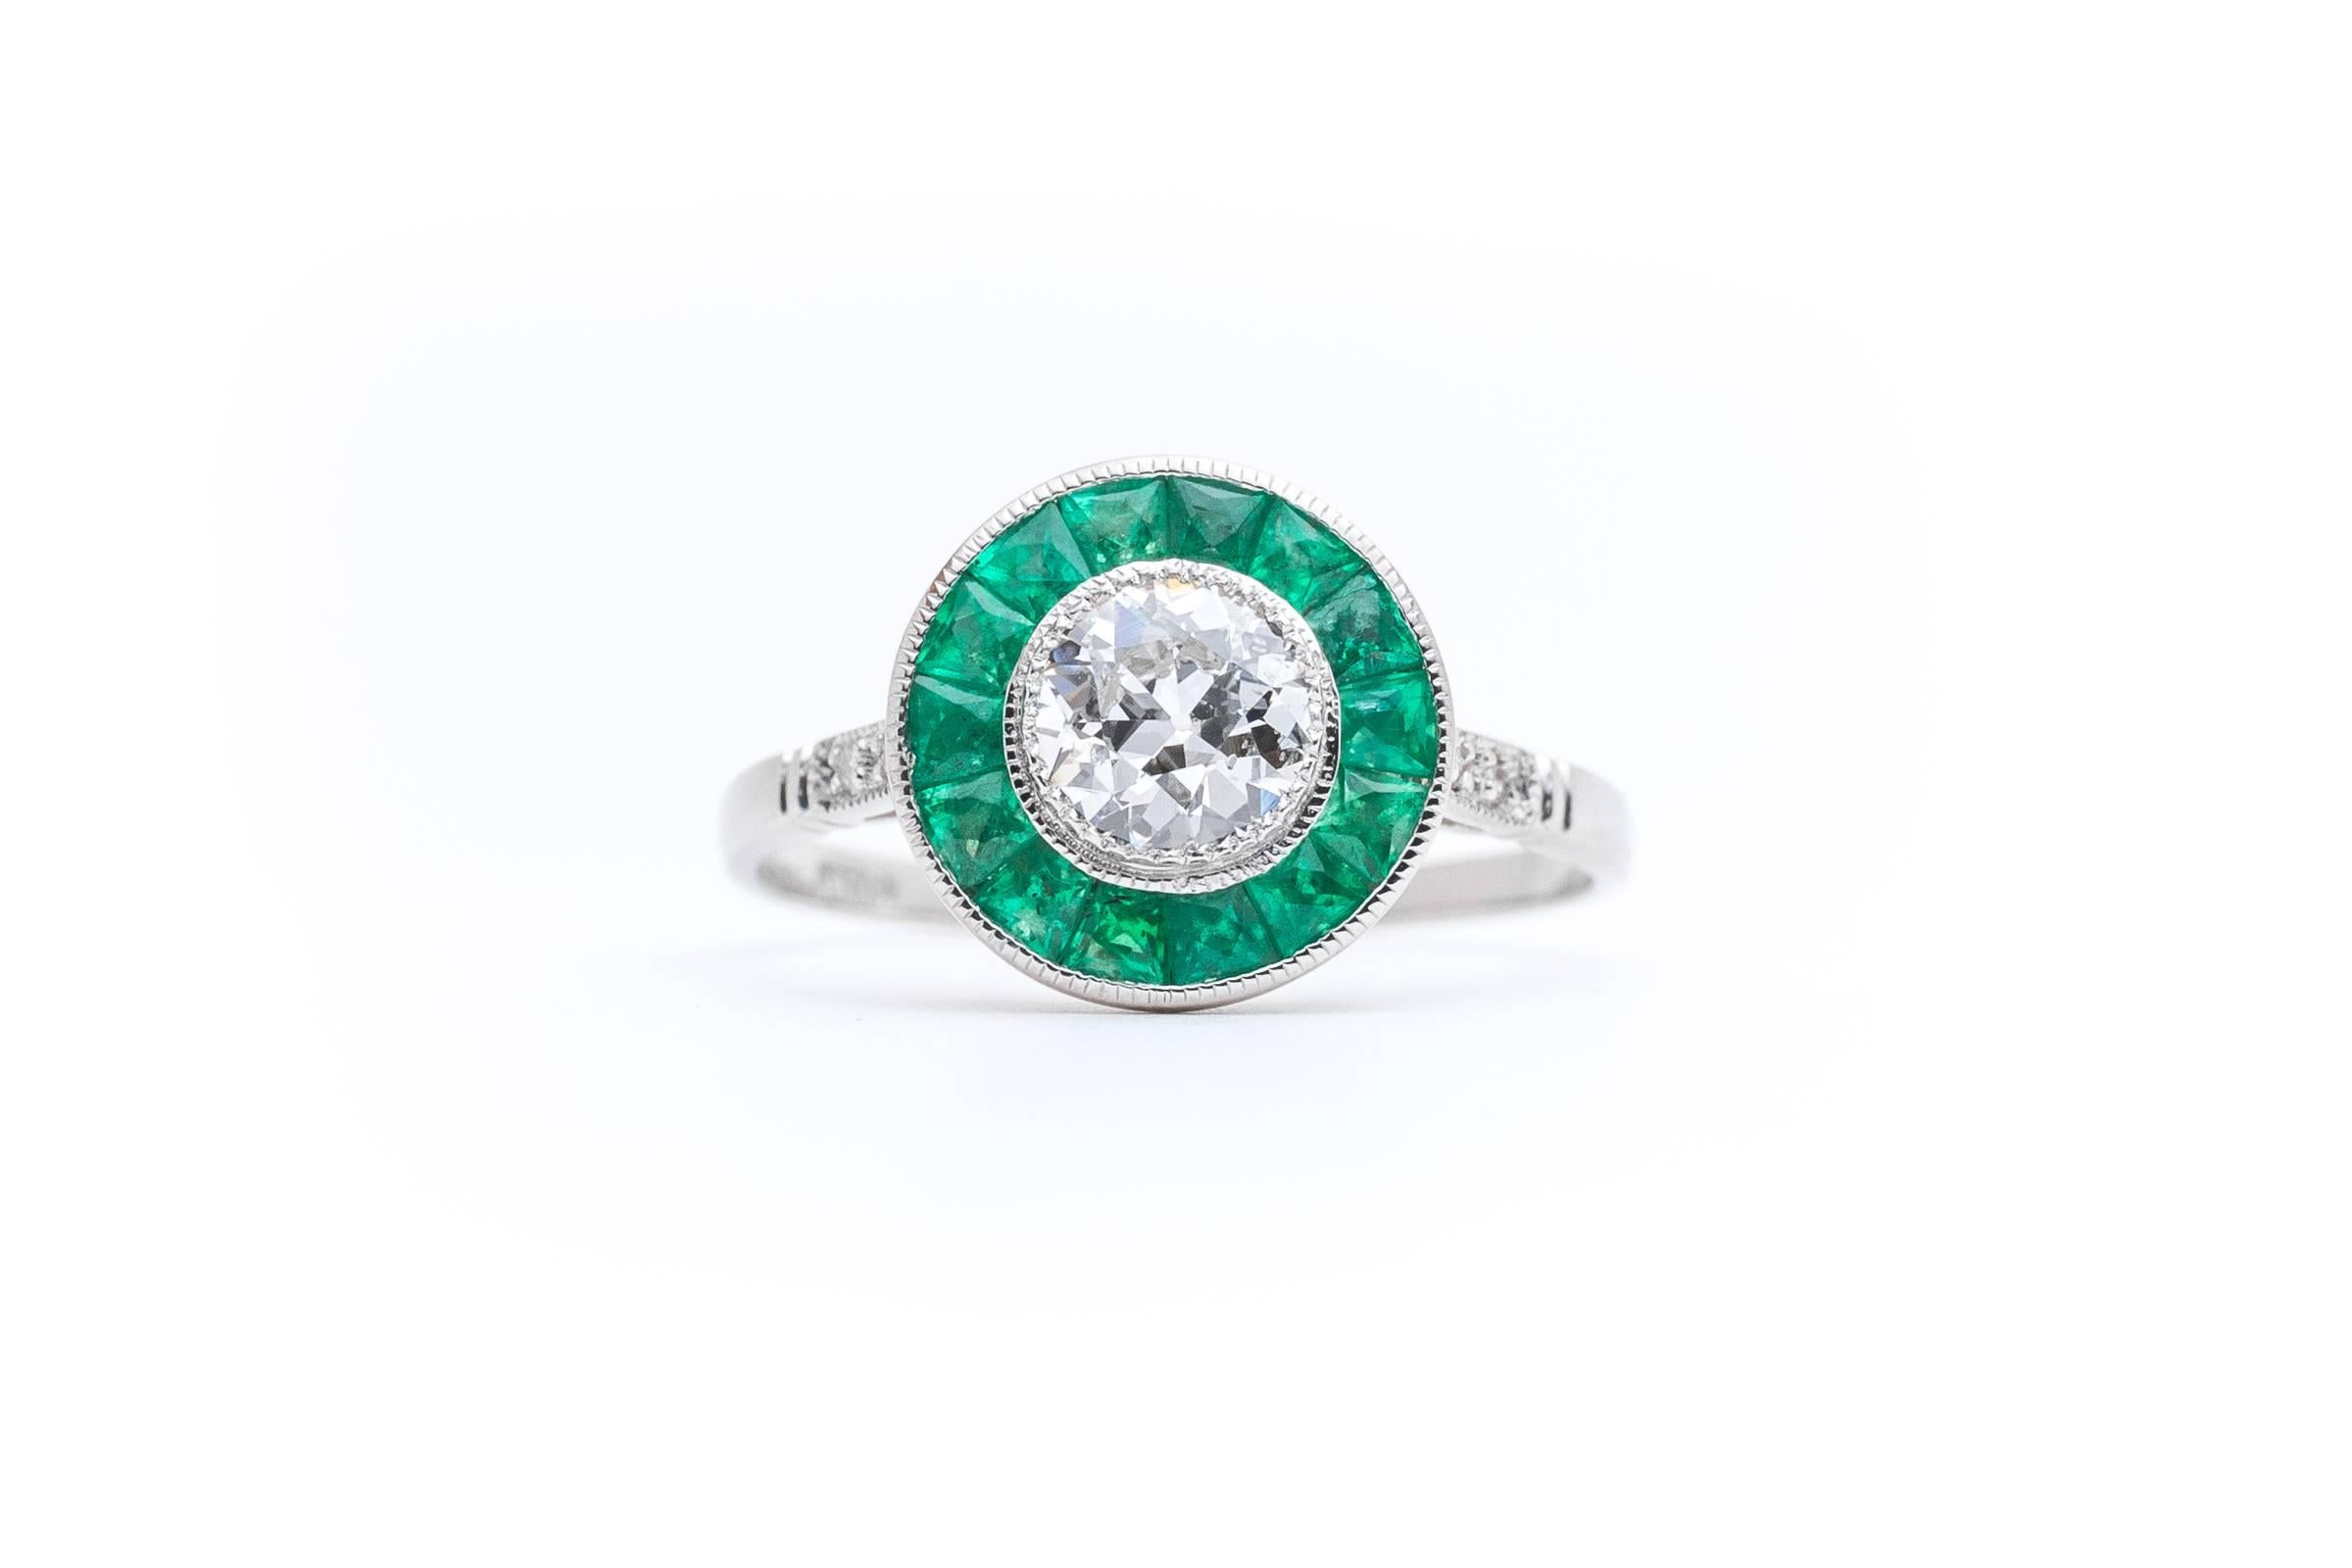 A stunning  diamond and emerald target ring in luxurious platinum. Completely hand crafted, this stunning target ring is a prime example of a French style engagement ring. Centered by a single antique European cut diamond surrounded by rich green